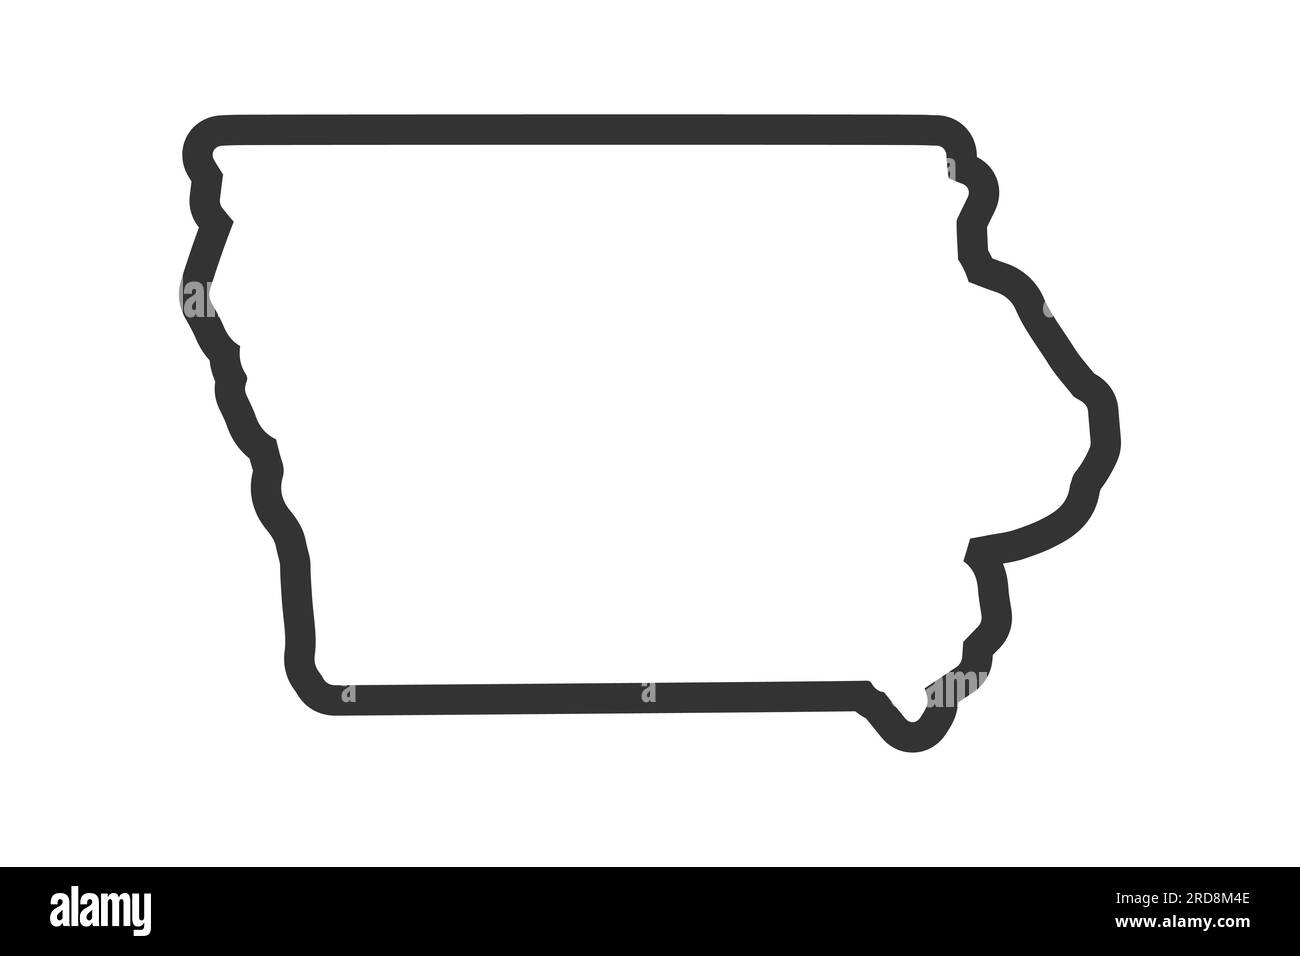 Iowa outline symbol. US state map. Vector illustration Stock Vector